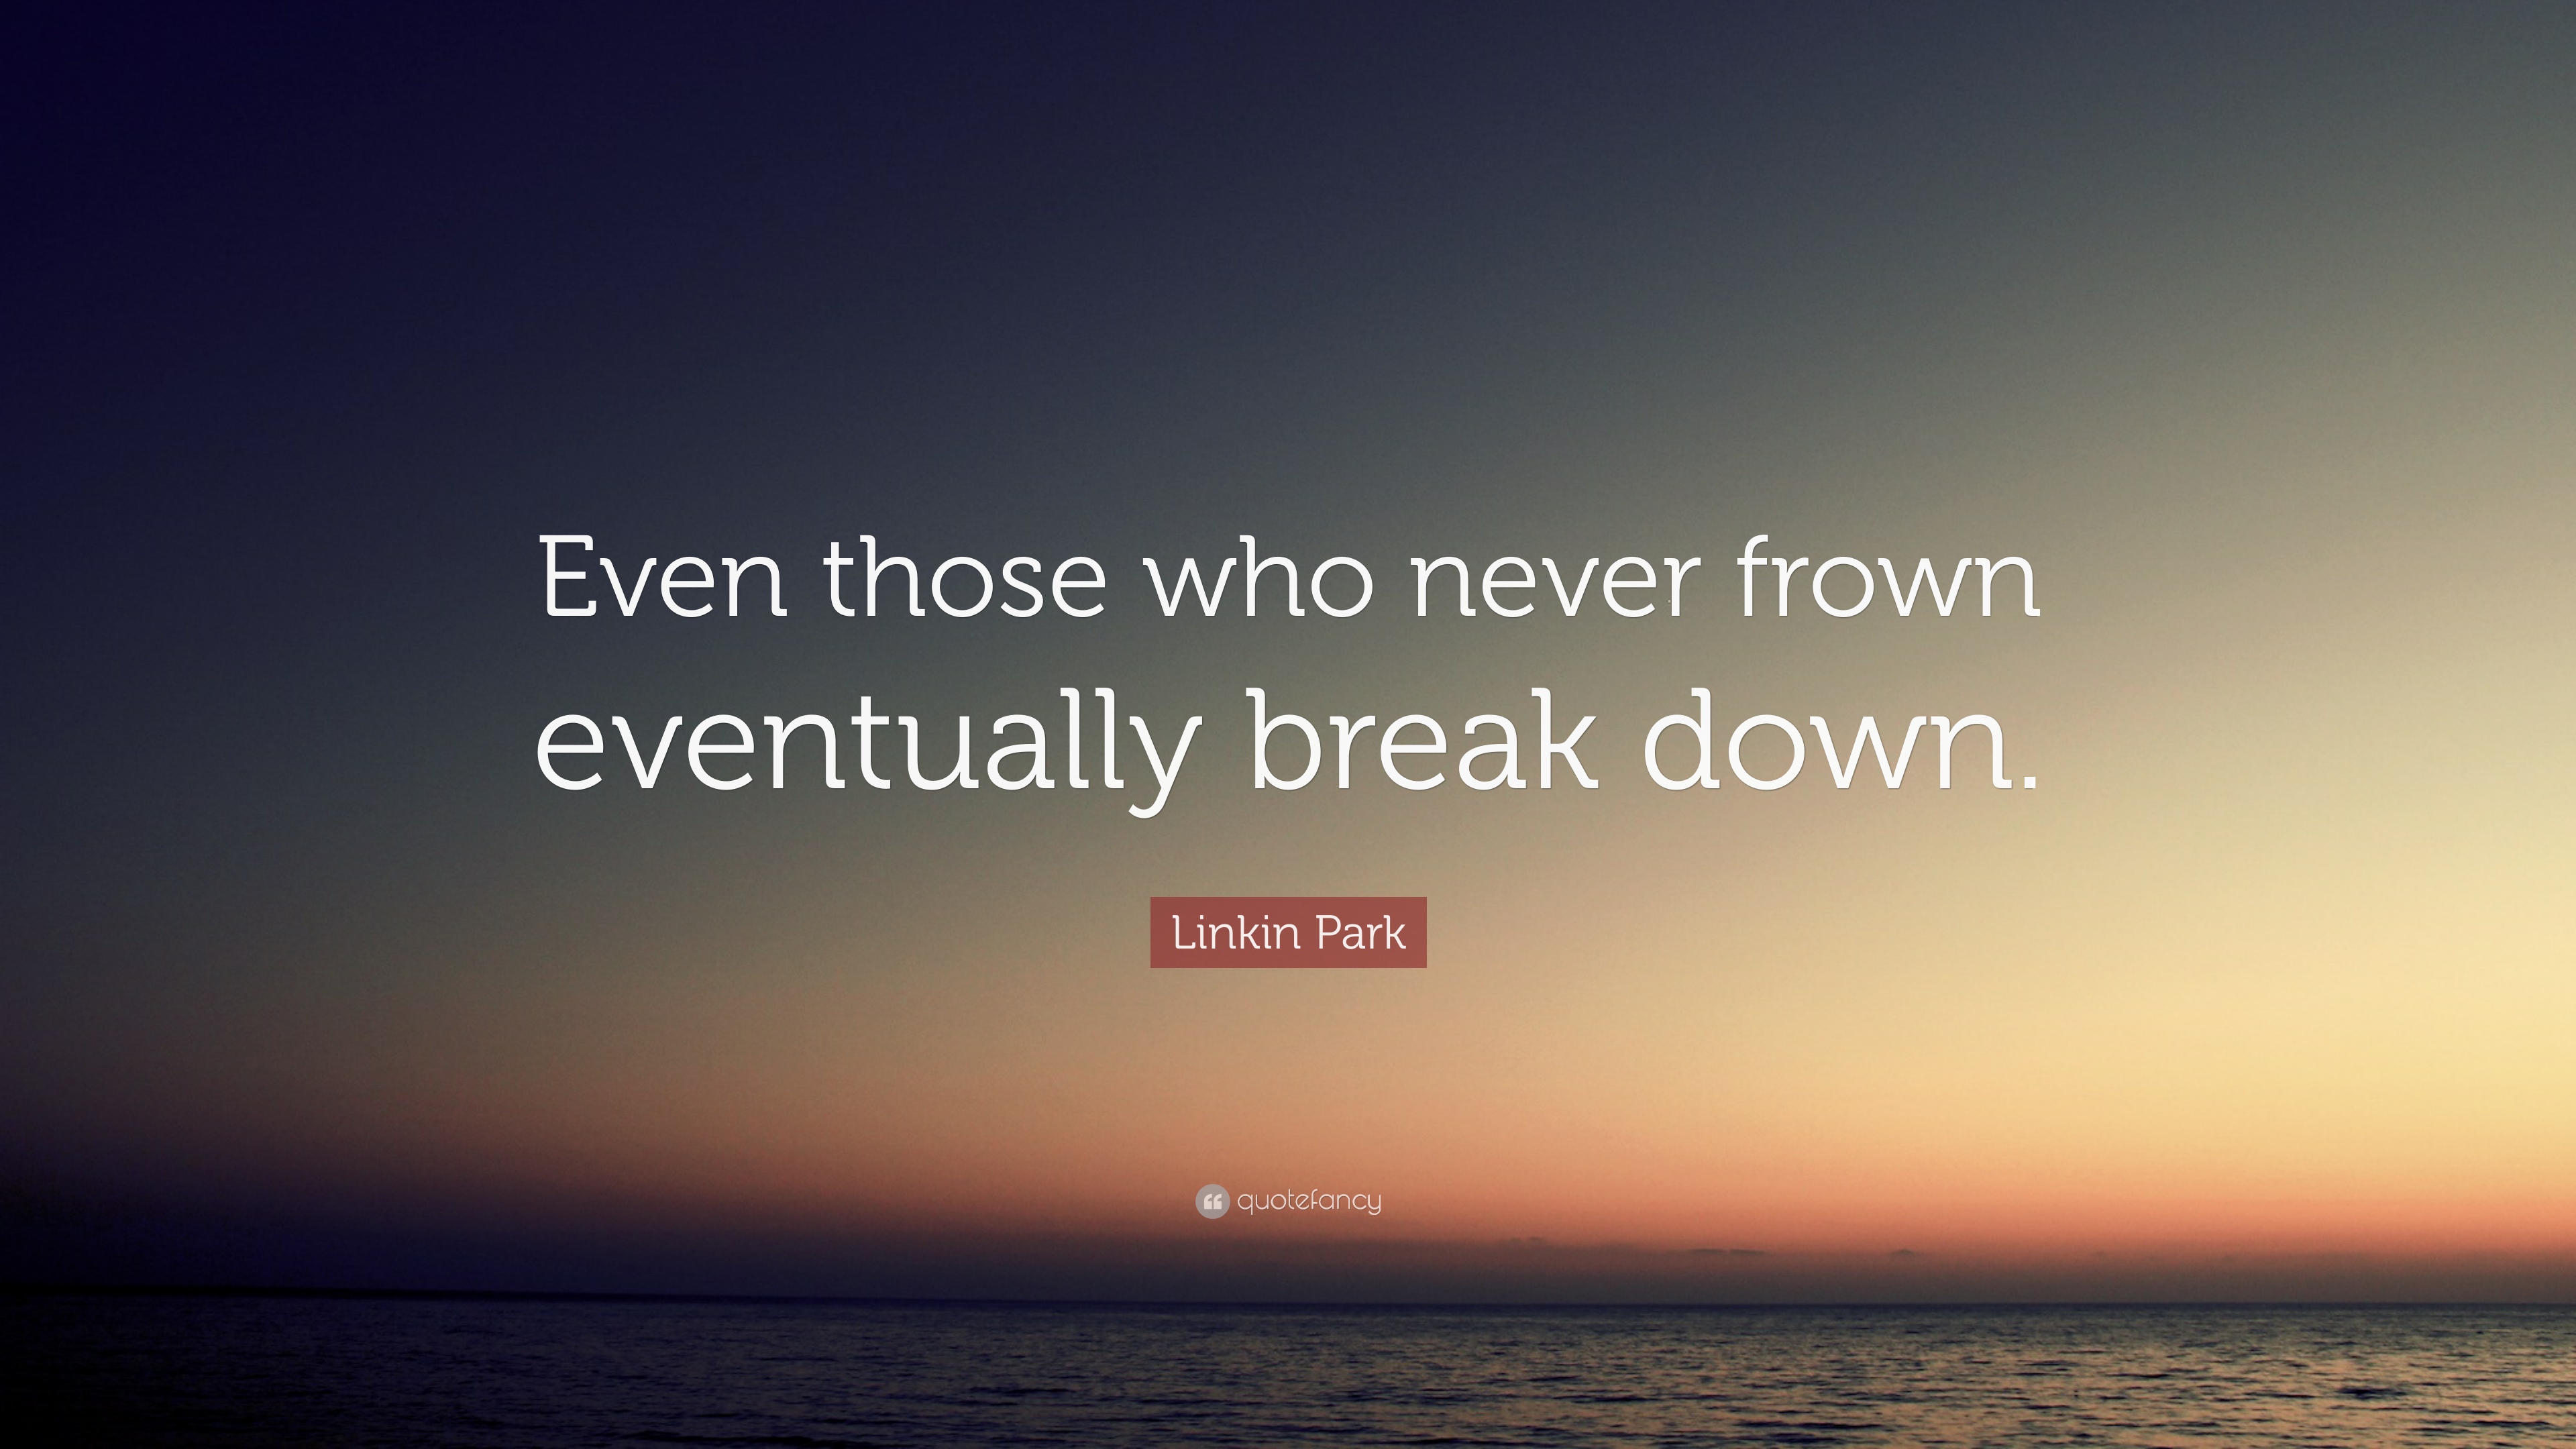 Linkin Park Quote: “Even those who never frown eventually